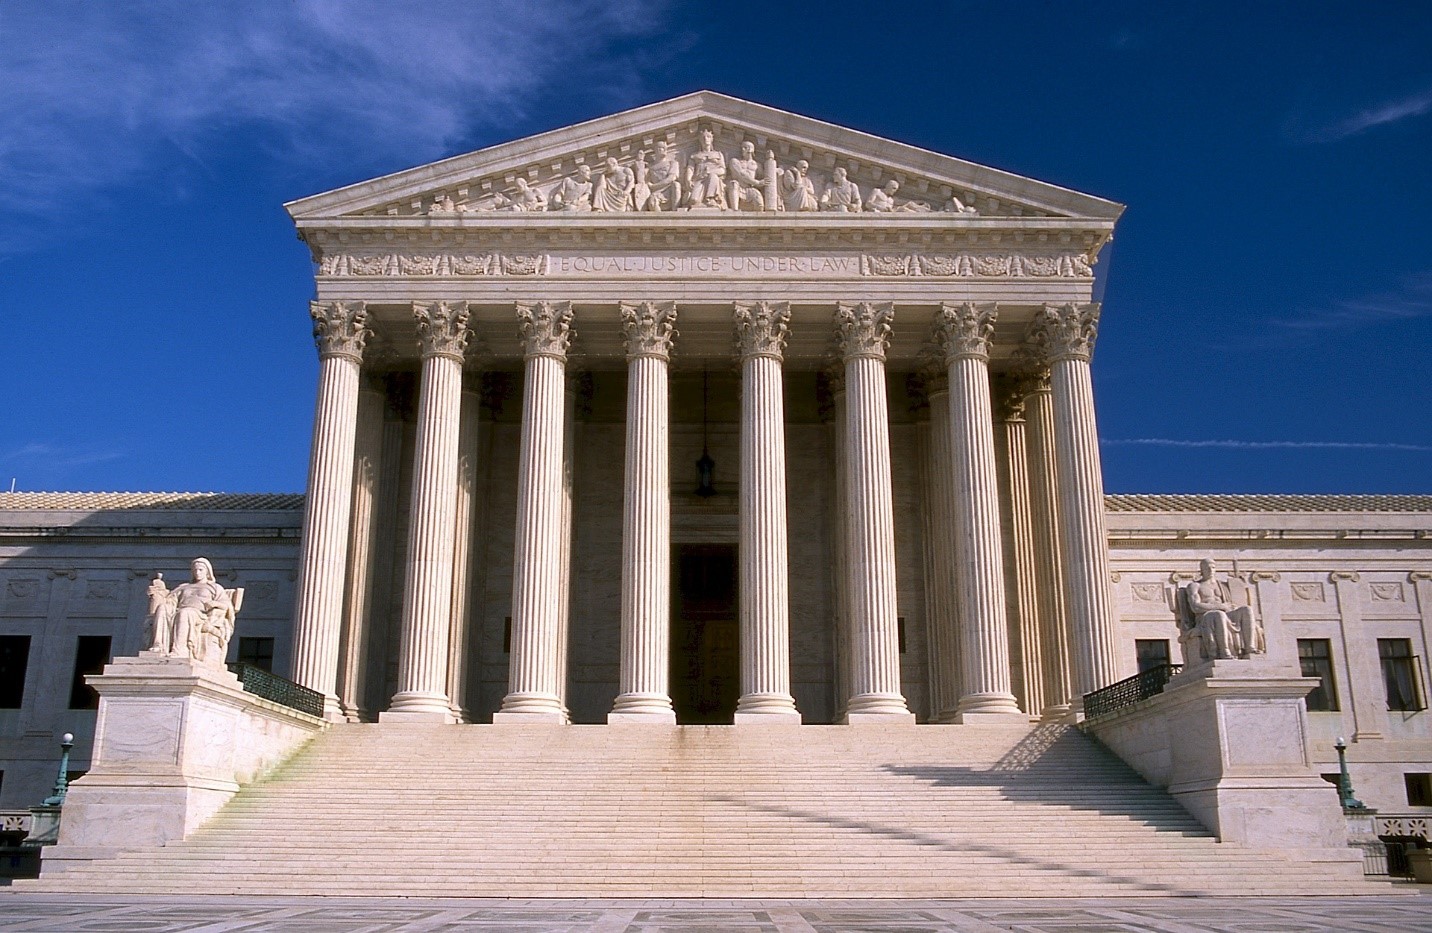 SCOTUS, the supreme court of the United States